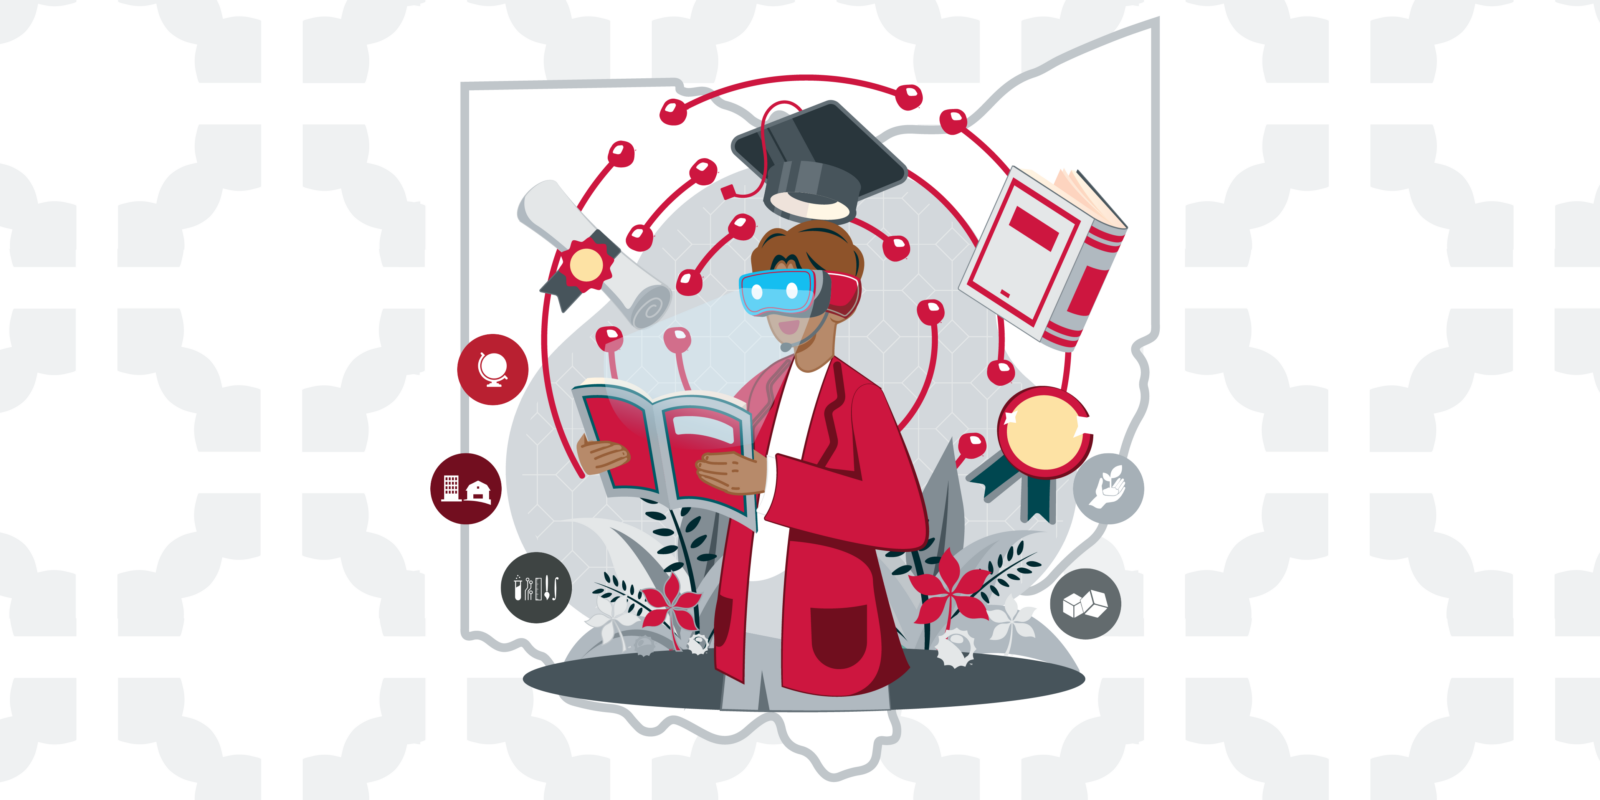 Ohio State illustration of student in VR